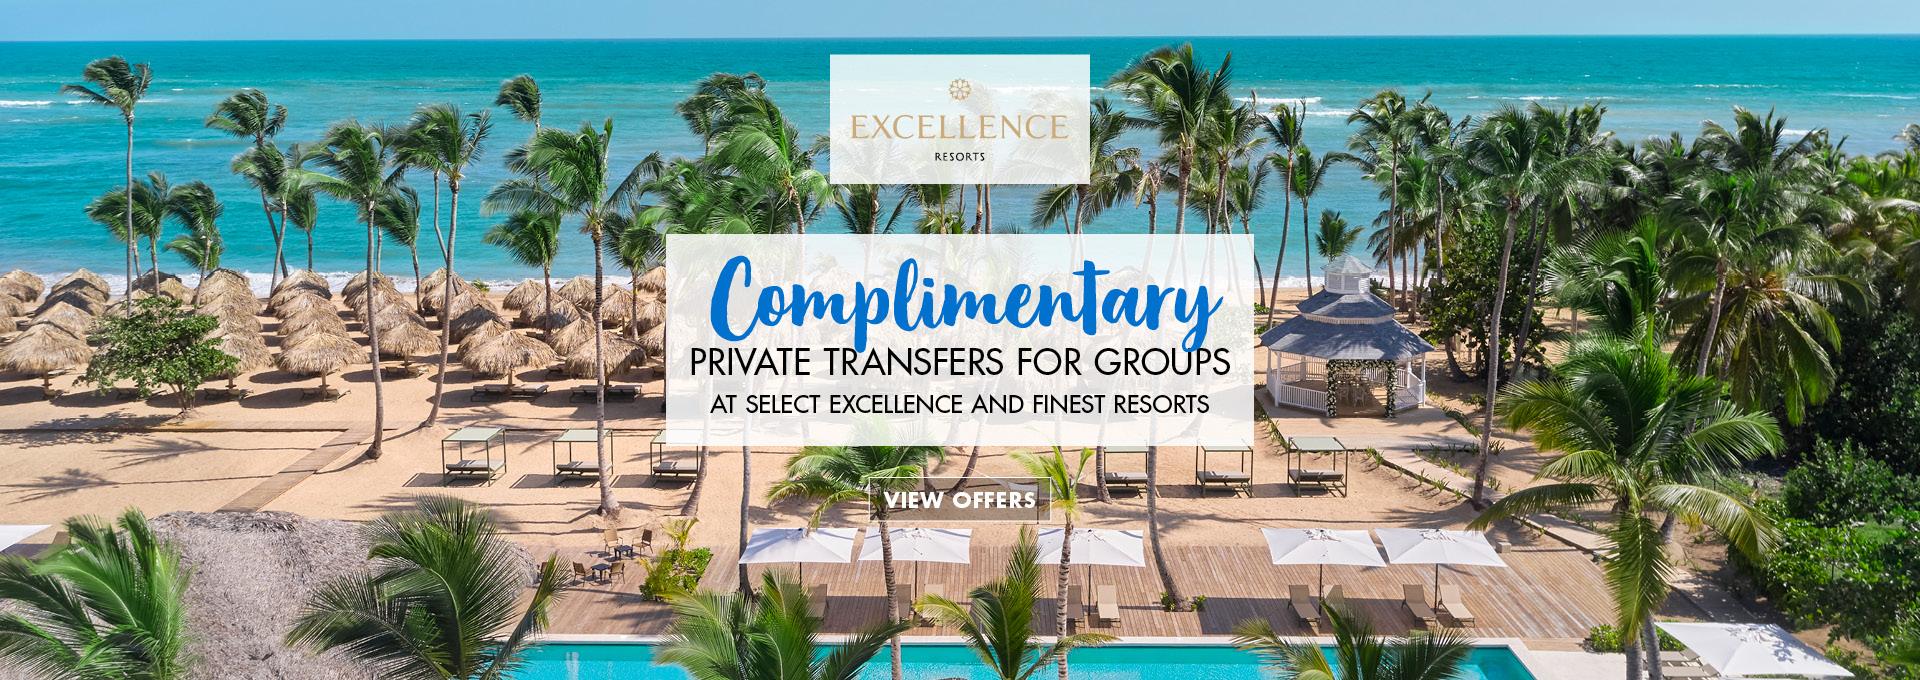 Complimentary private transfers for groups at select Excellence and Finest Resorts